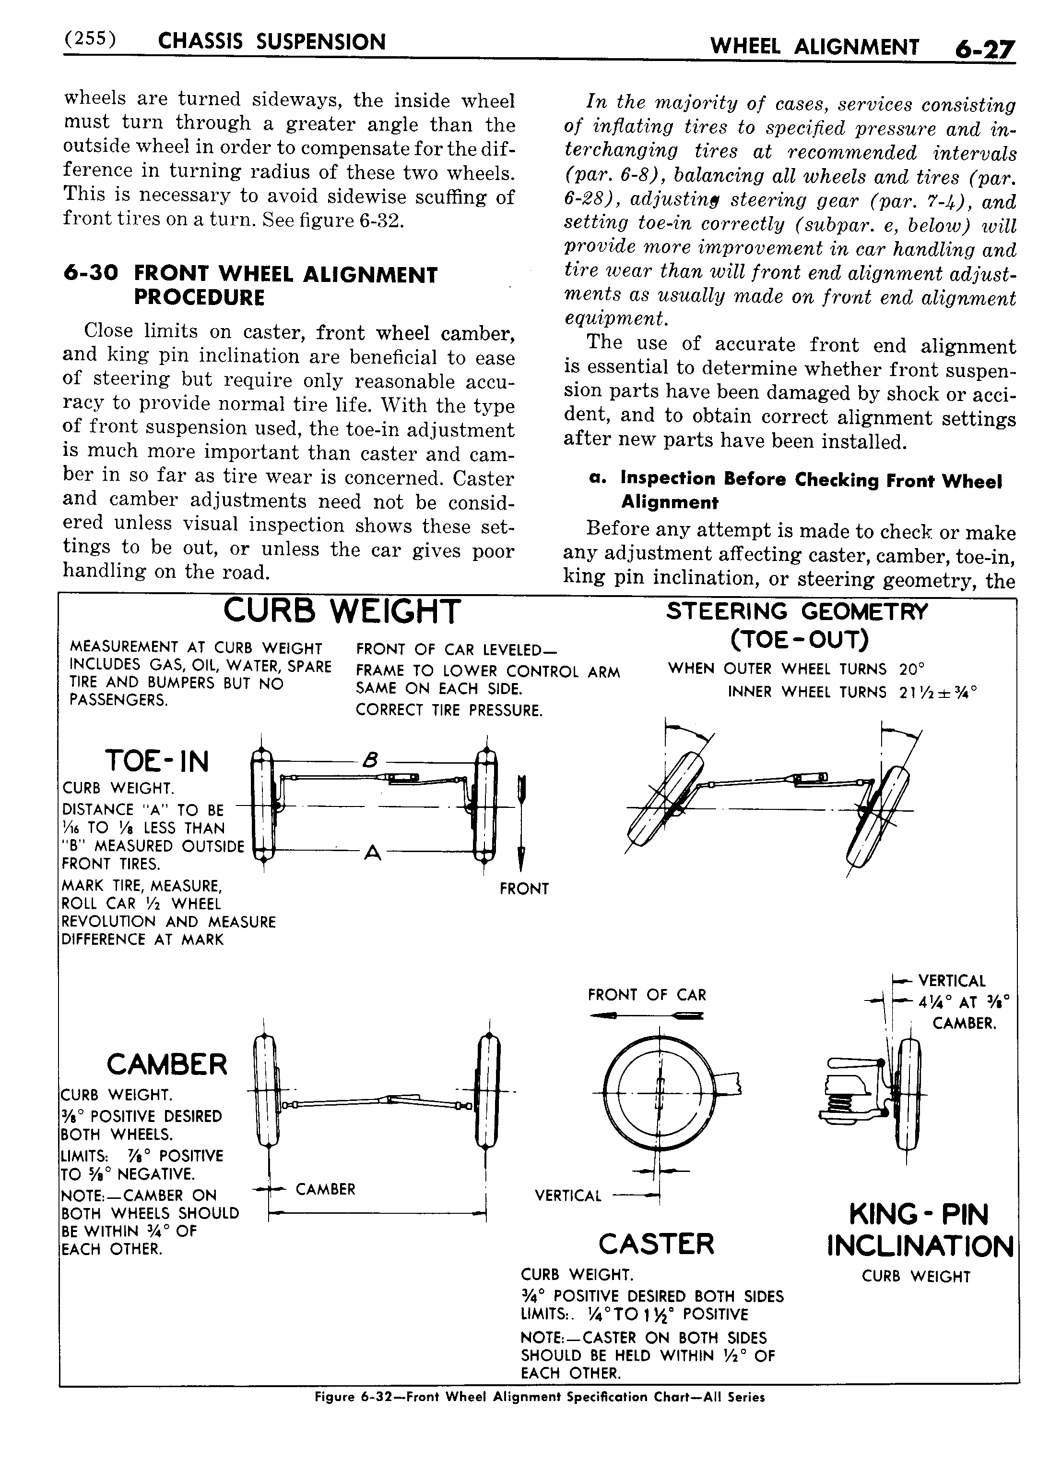 n_07 1951 Buick Shop Manual - Chassis Suspension-027-027.jpg